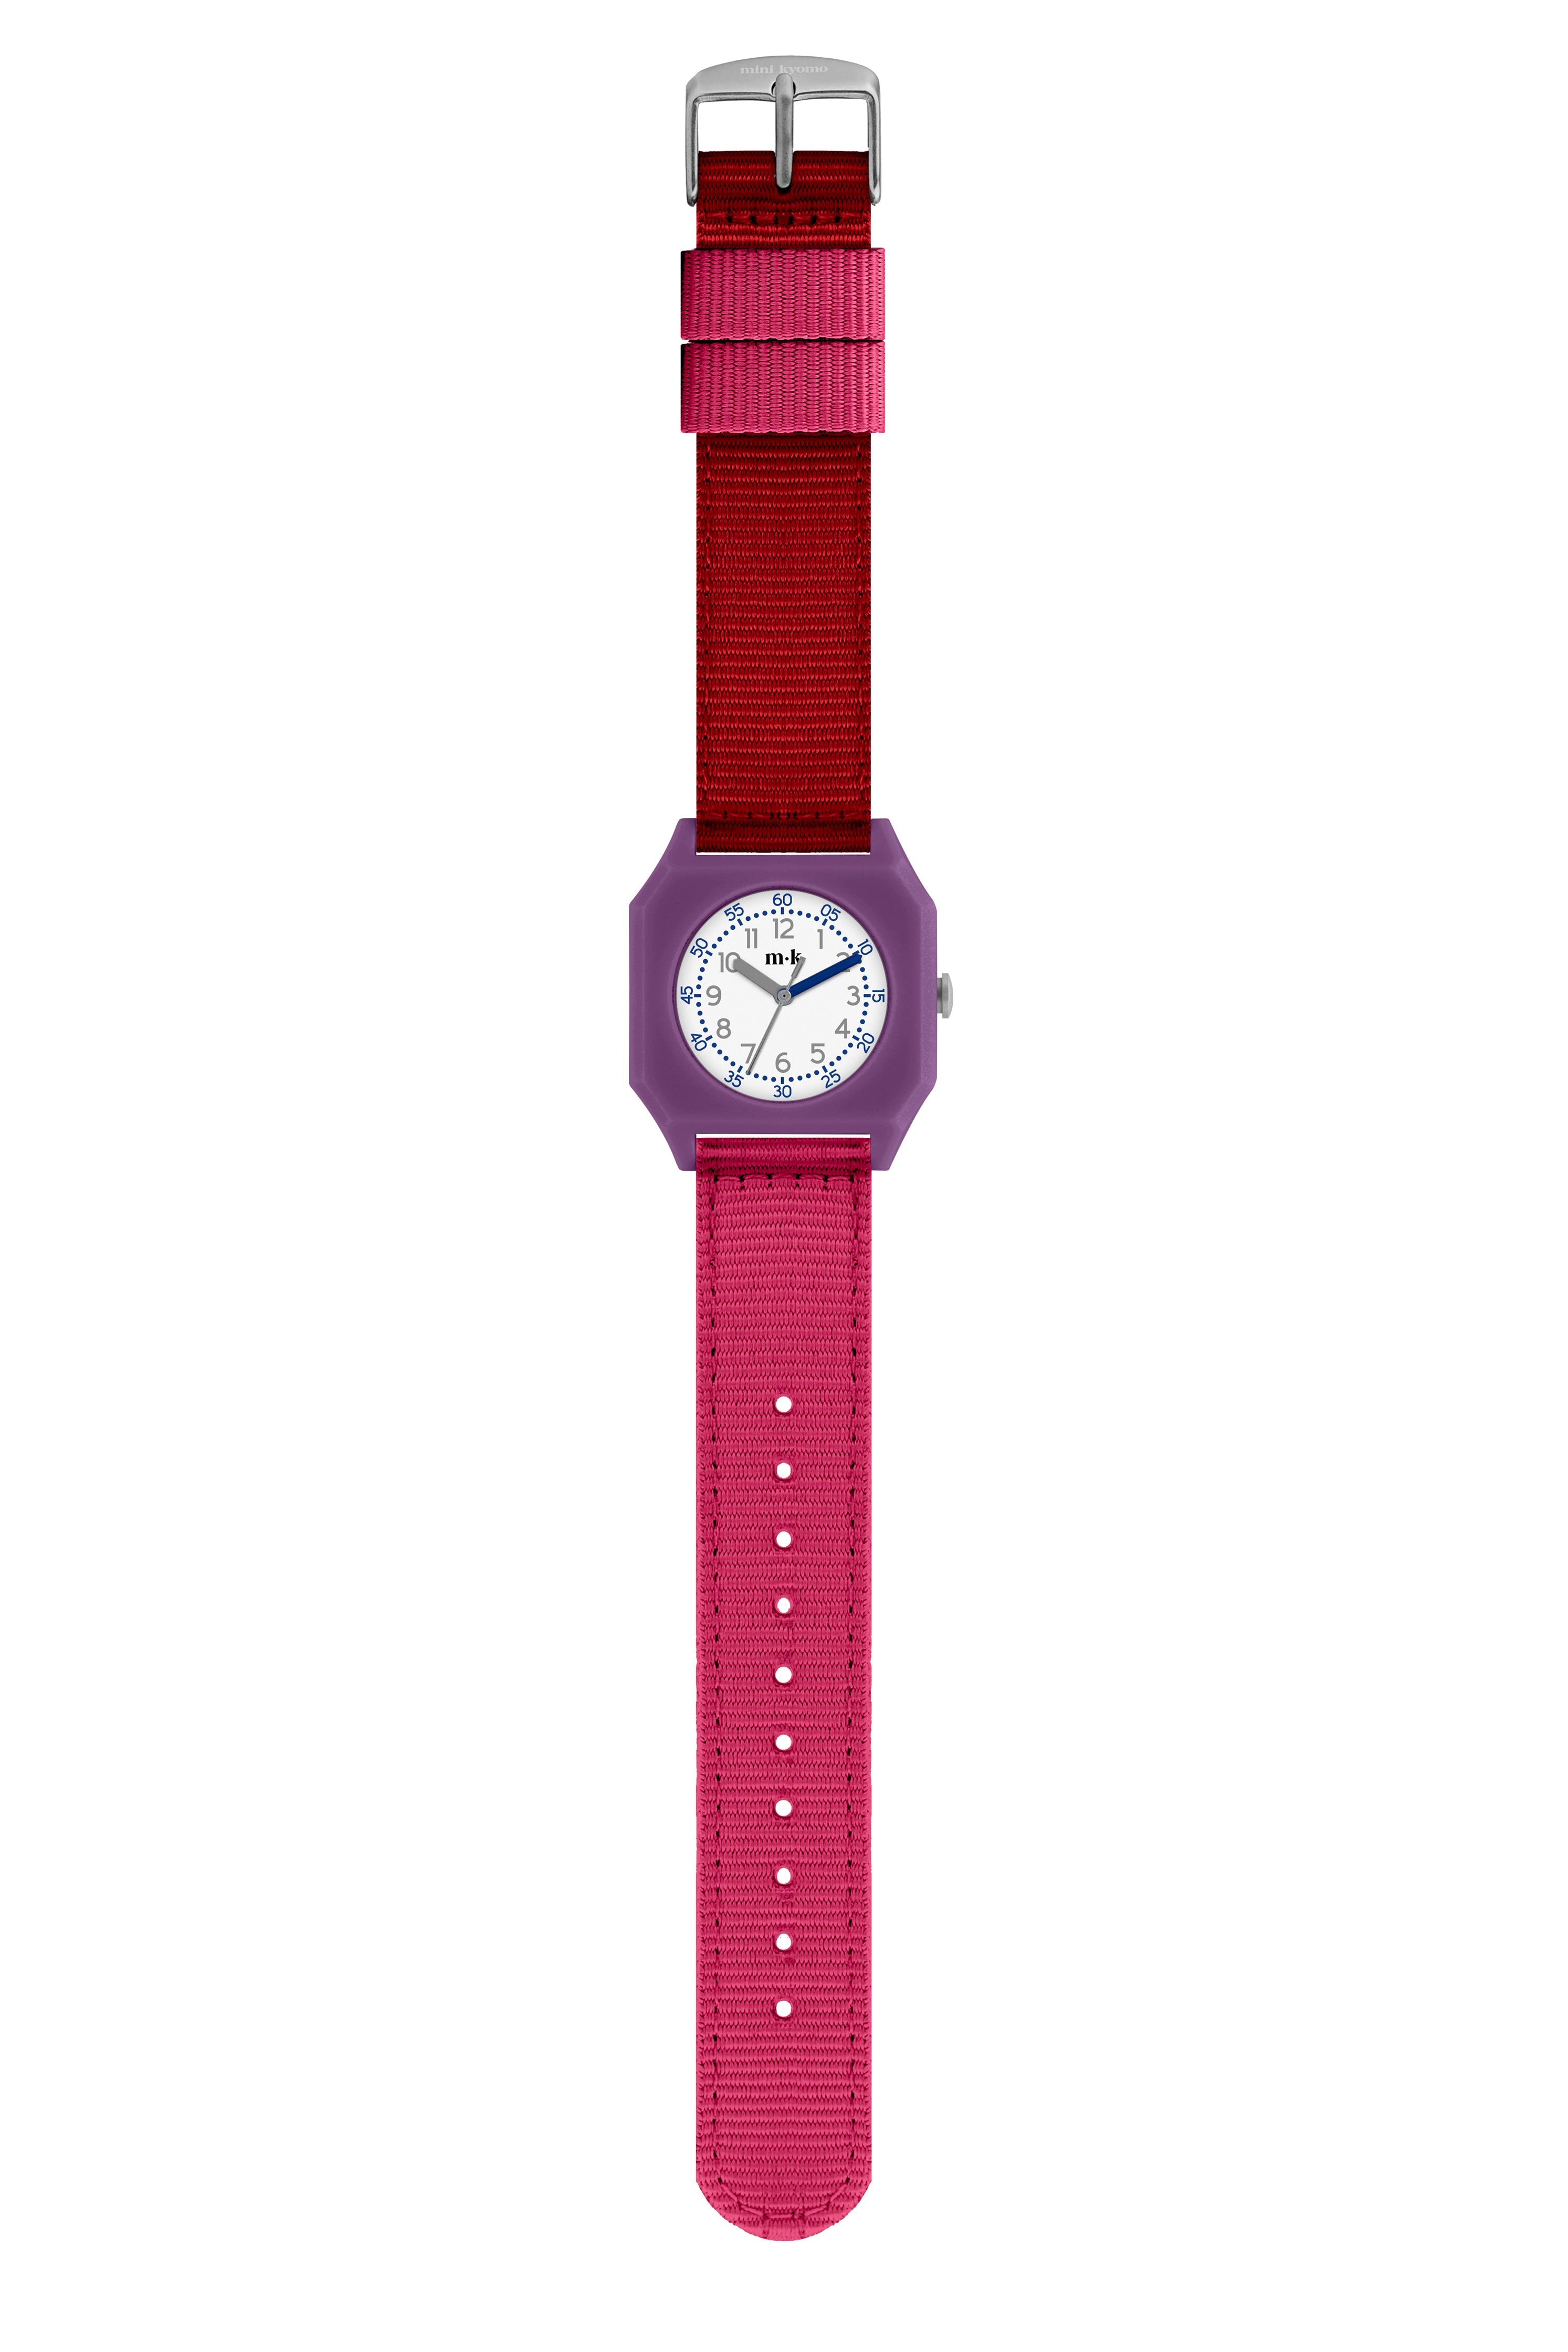 Coral Reef - watch